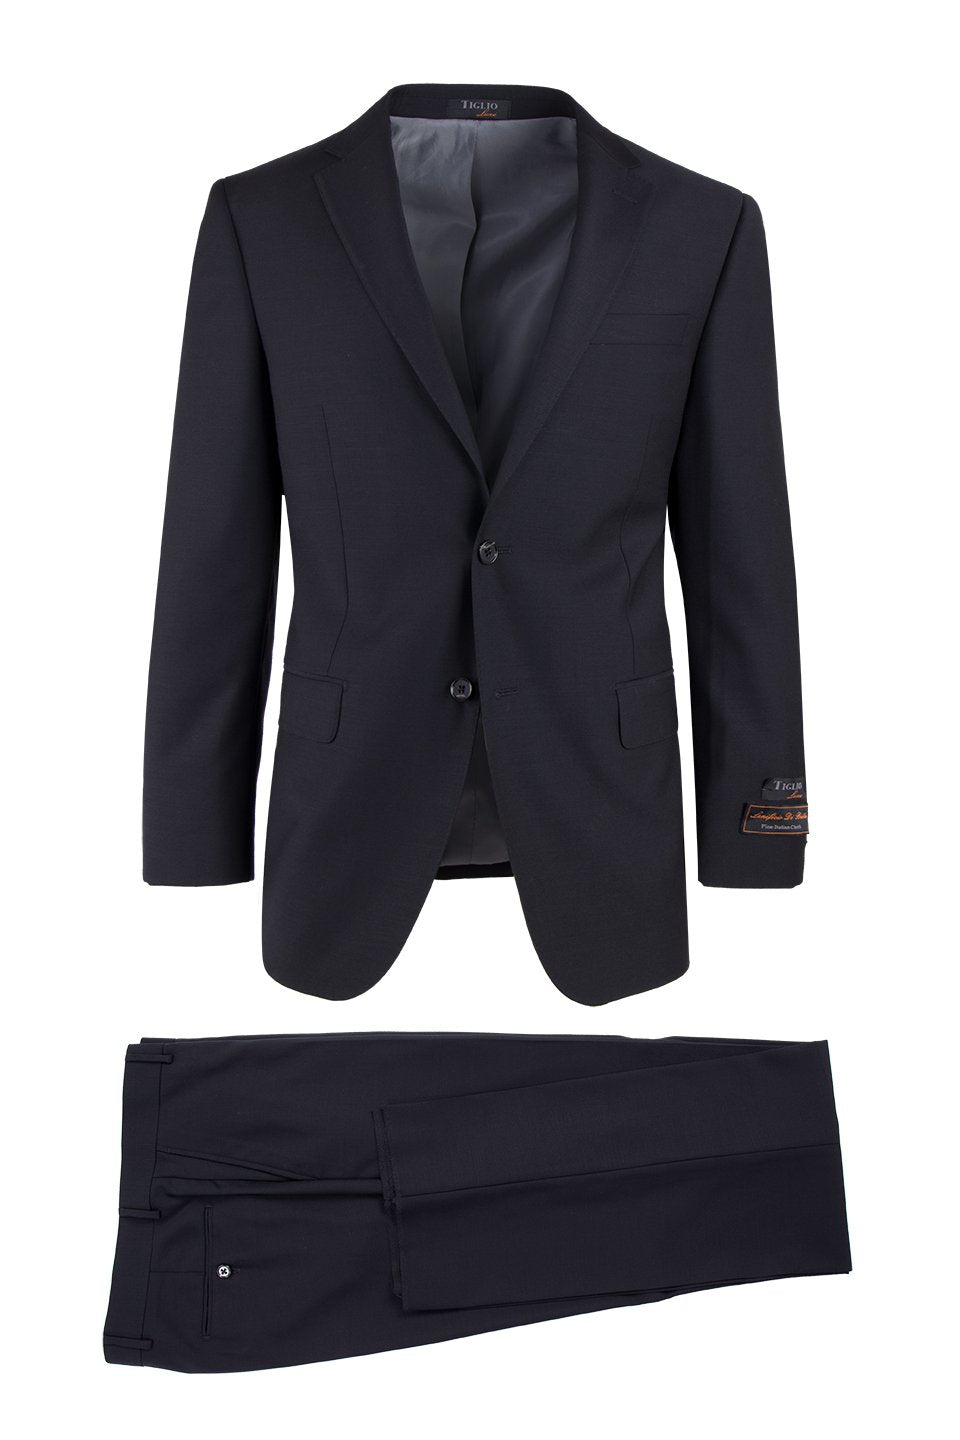 Novello Black, Modern Fit, Pure Wool Suit by Tiglio Luxe